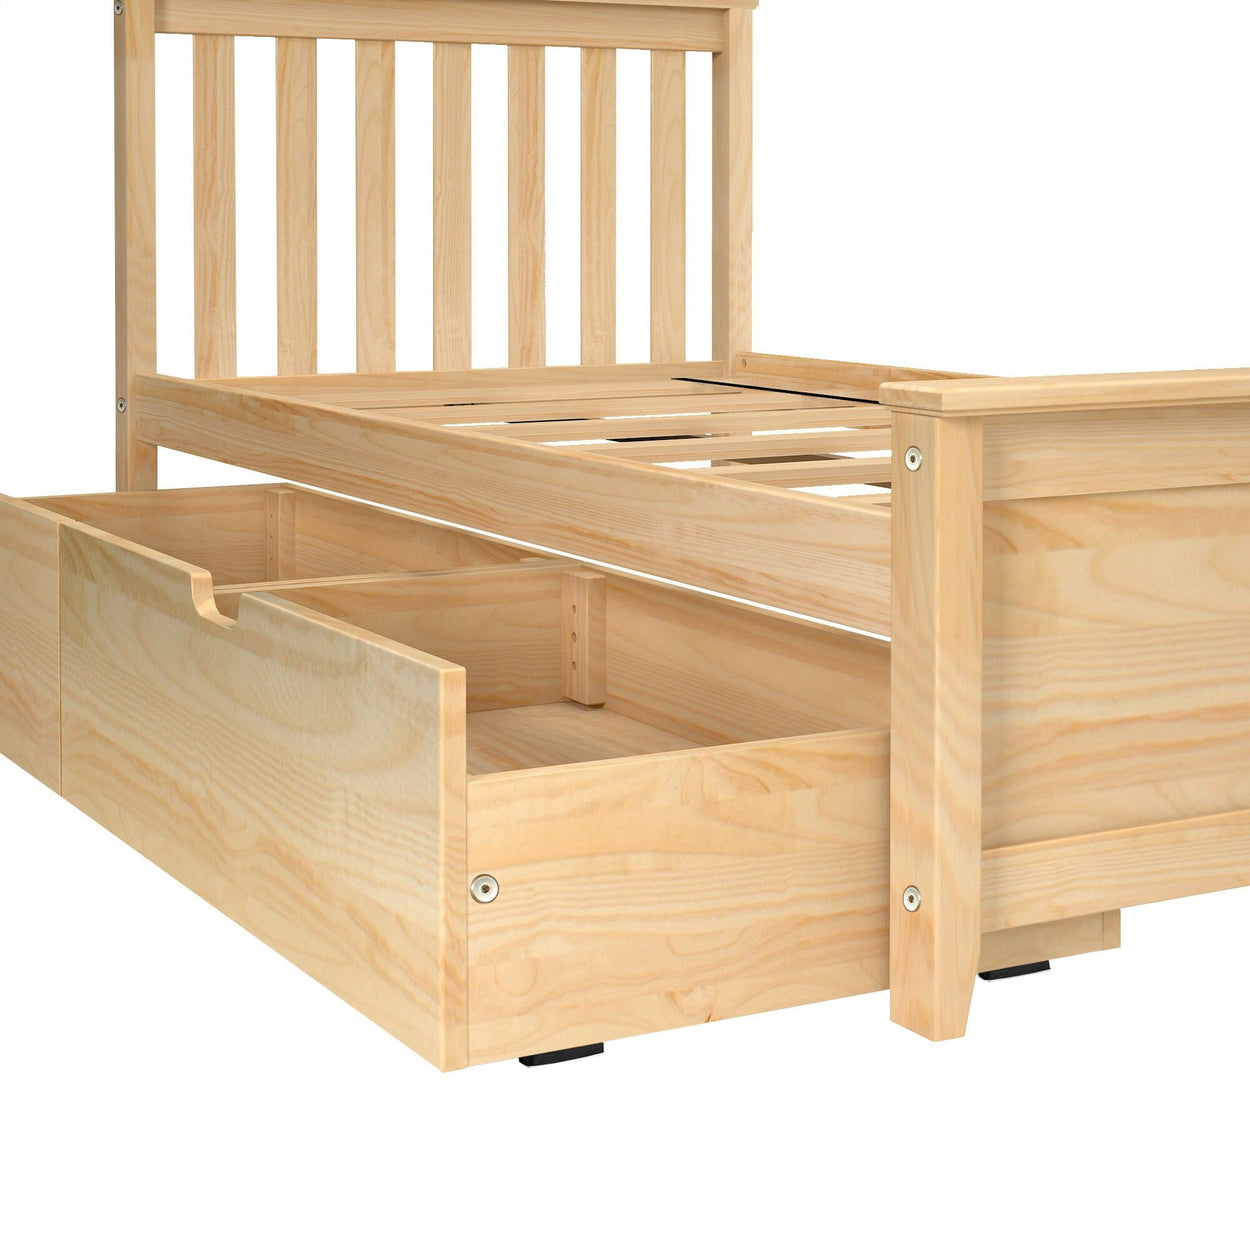 187210-001 : Kids Beds Twin-Size Platform Bed with Underbed Storage Drawers, Natural